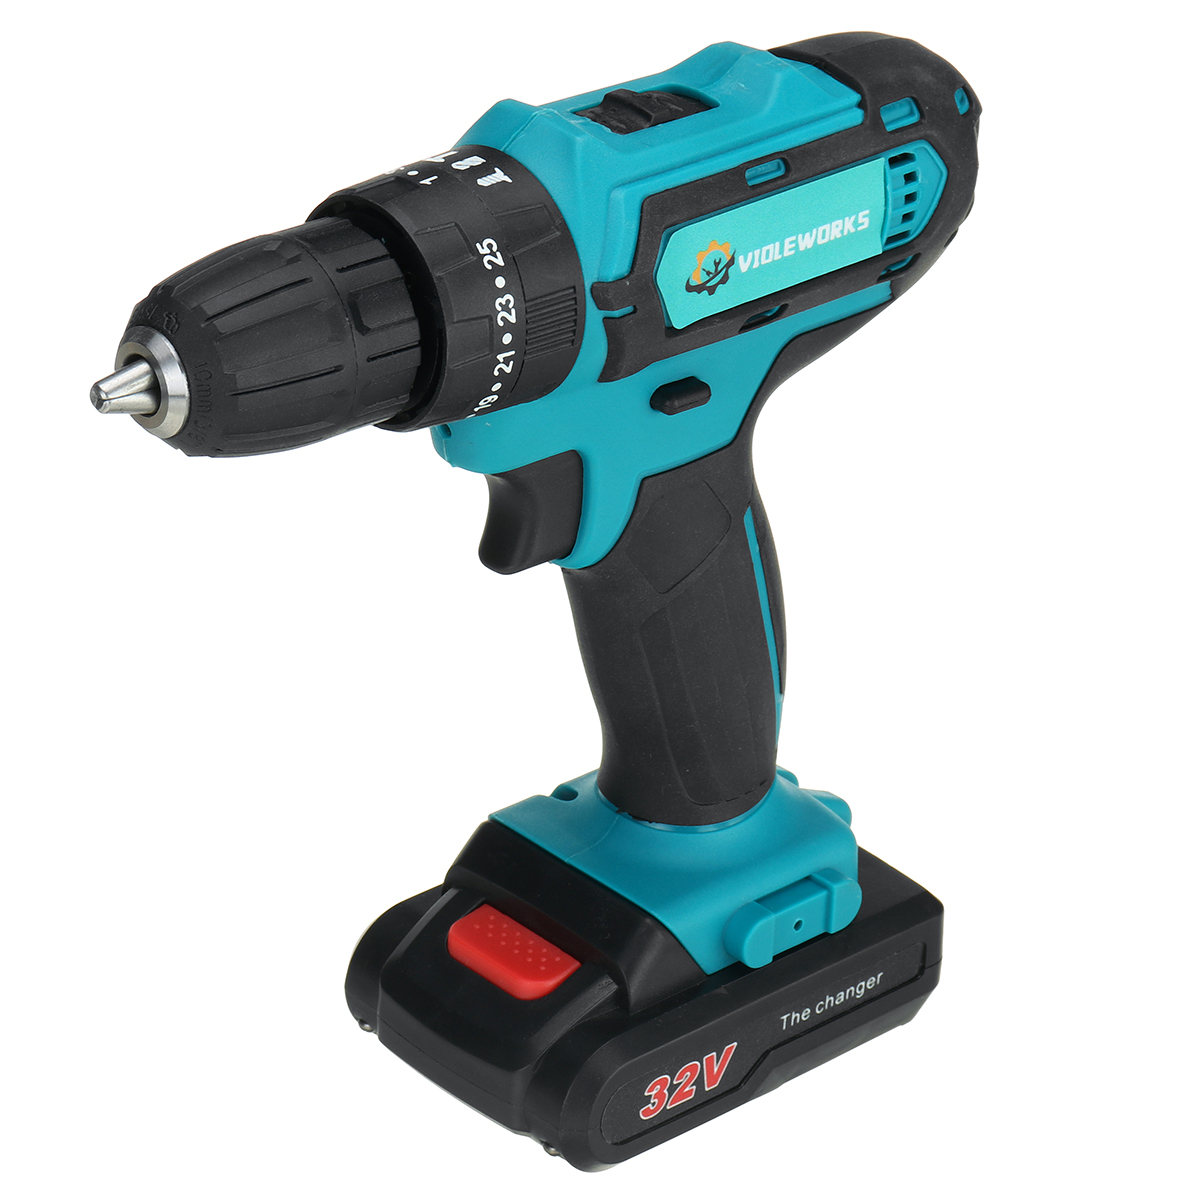 2-Speed-Power-Drills-6000mah-Cordless-Drill-3-IN-1-Electric-Screwdriver-Hammer-Drill-with-2pcs-Batte-1416071-6